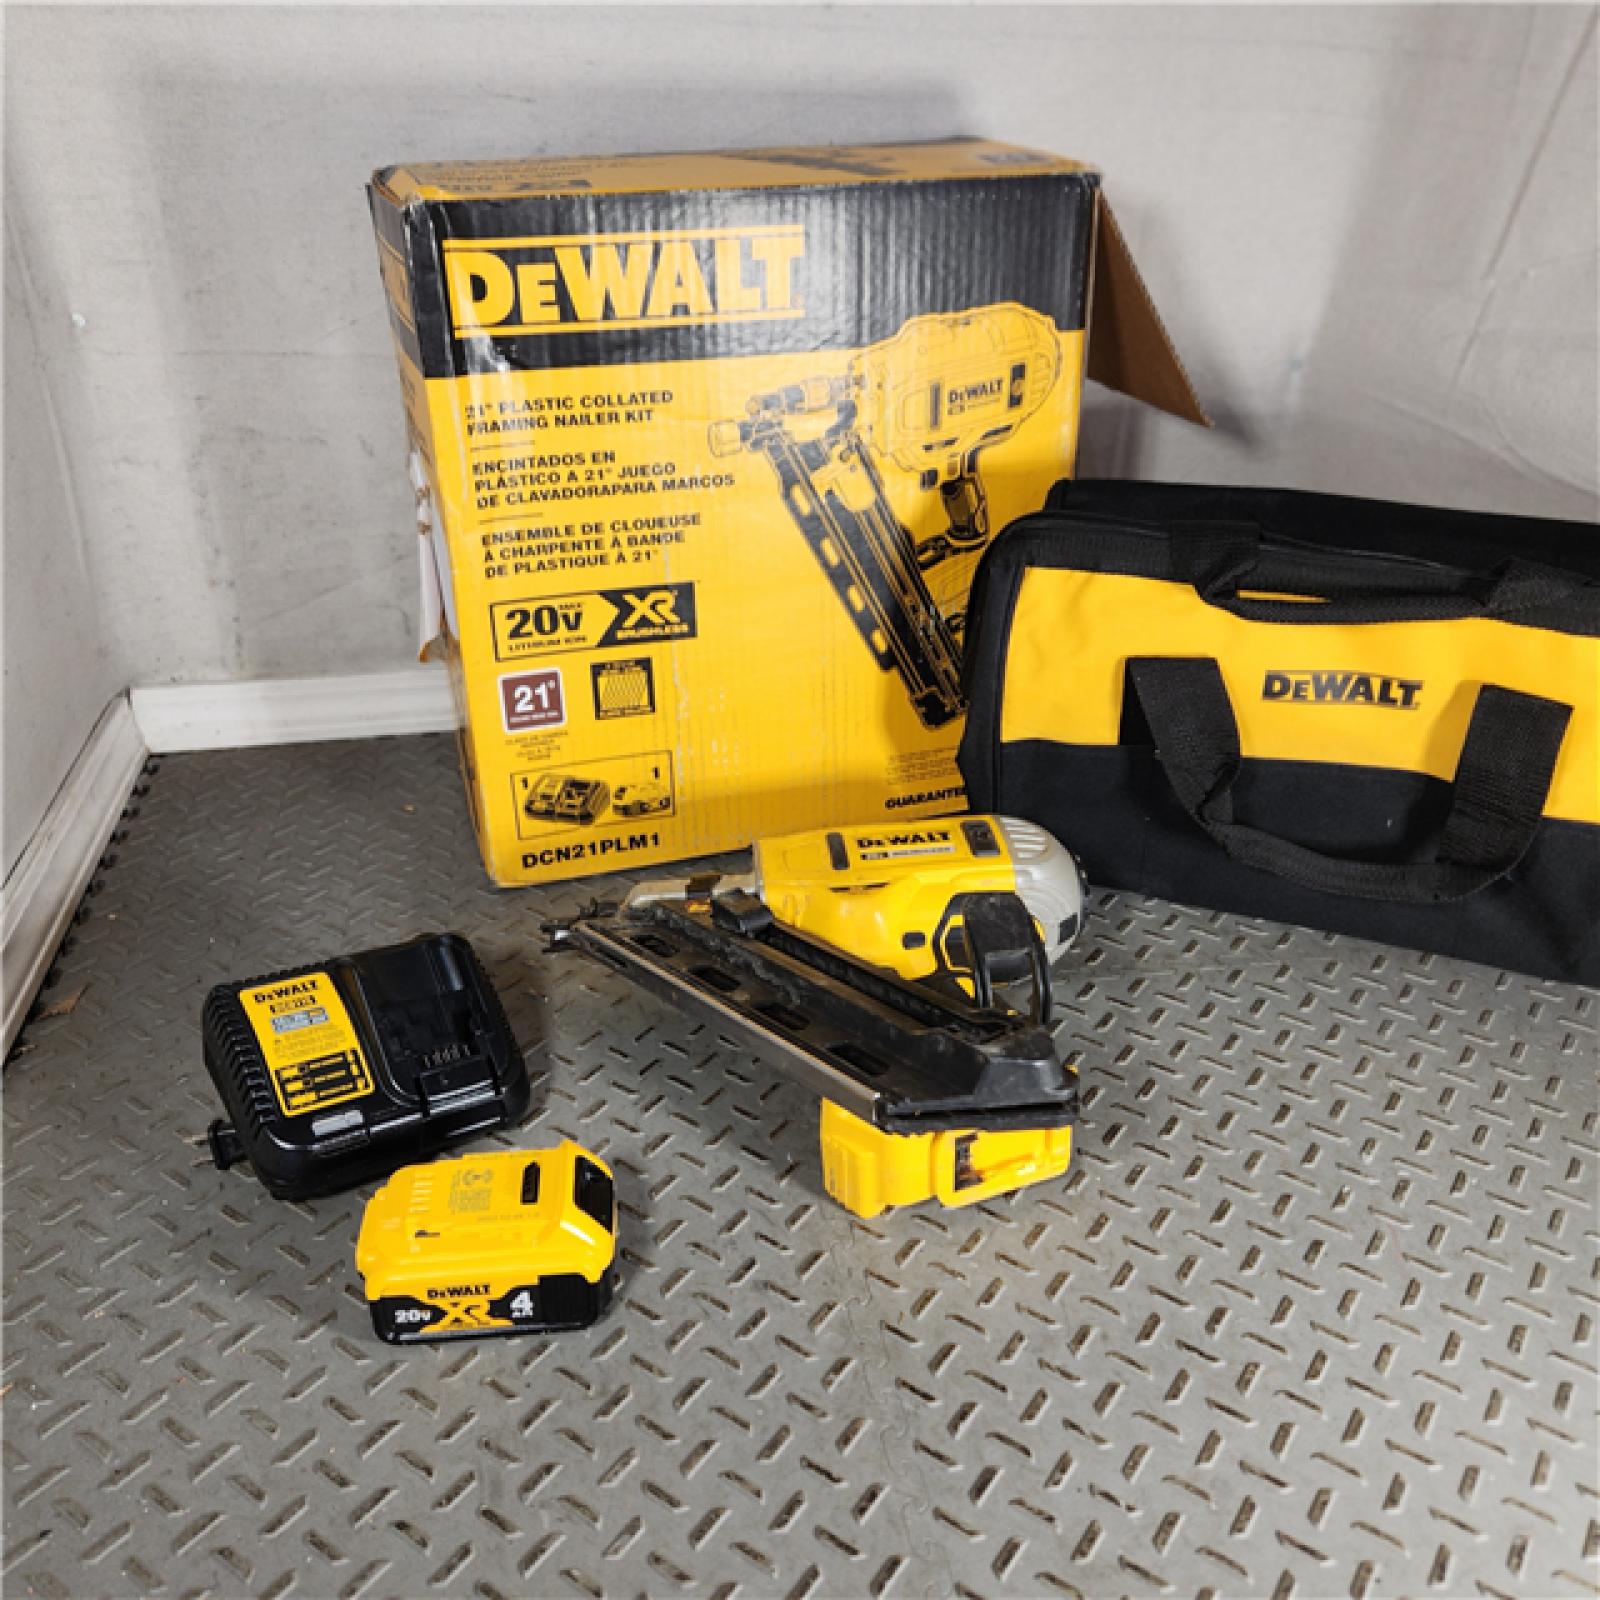 Houston location- AS-IS DeWalt 20V MAX Collated Cordless Framing Nailer Tool Kit with Rafter Hook (Appears in used condition)